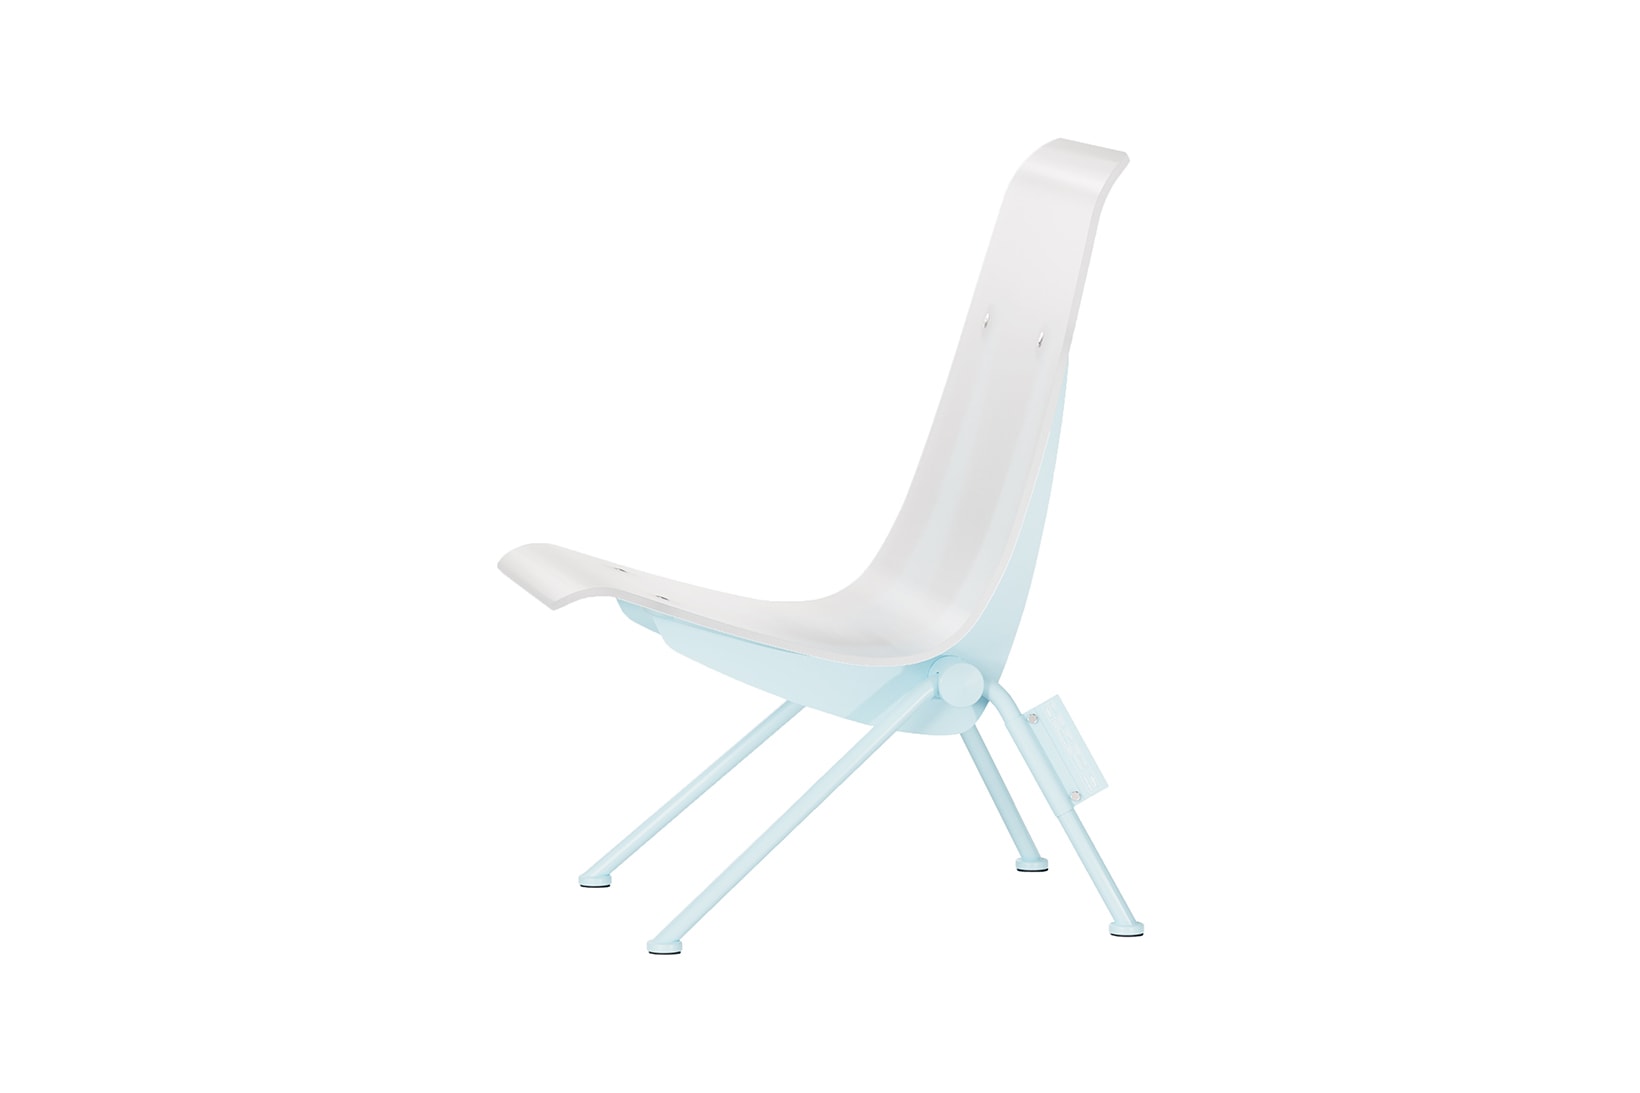 Virgil Abloh c/o Vitra Furniture Collection Chair Antony